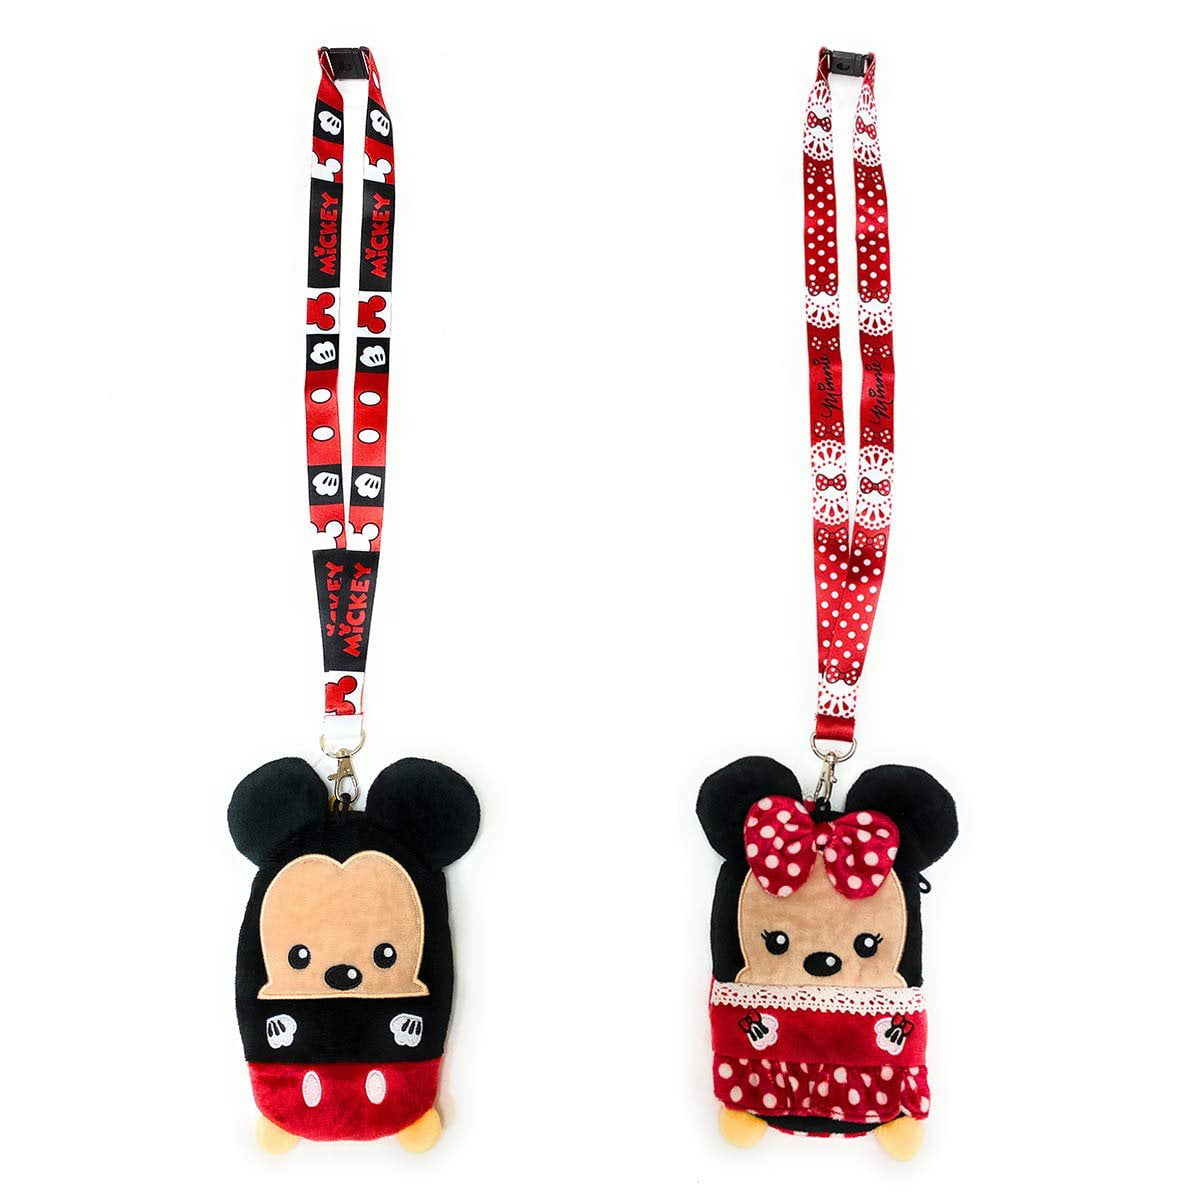 PLASTIC HOLDER ZIP Loc for DISNEY TICKET/FAST PASS & ID/BADGE/CARD for LANYARDS 